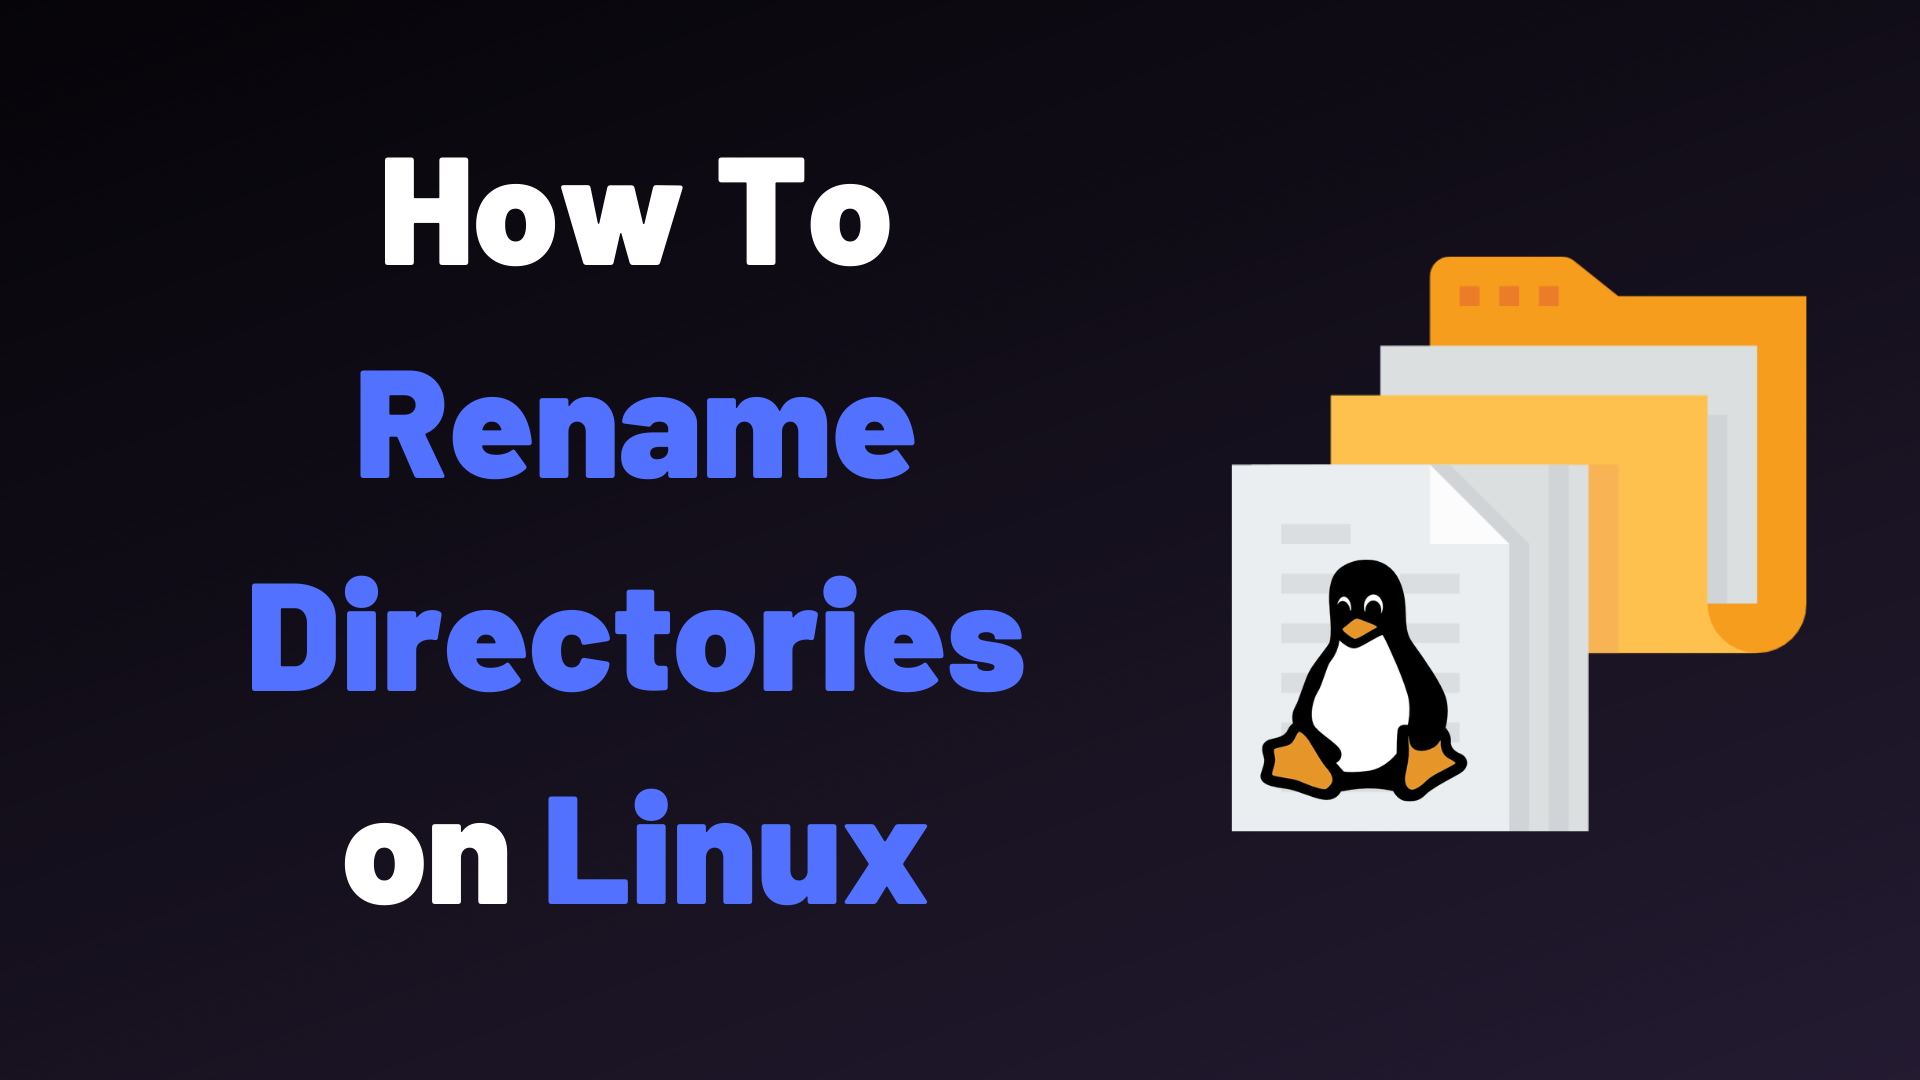 How To Rename a Directory on Linux